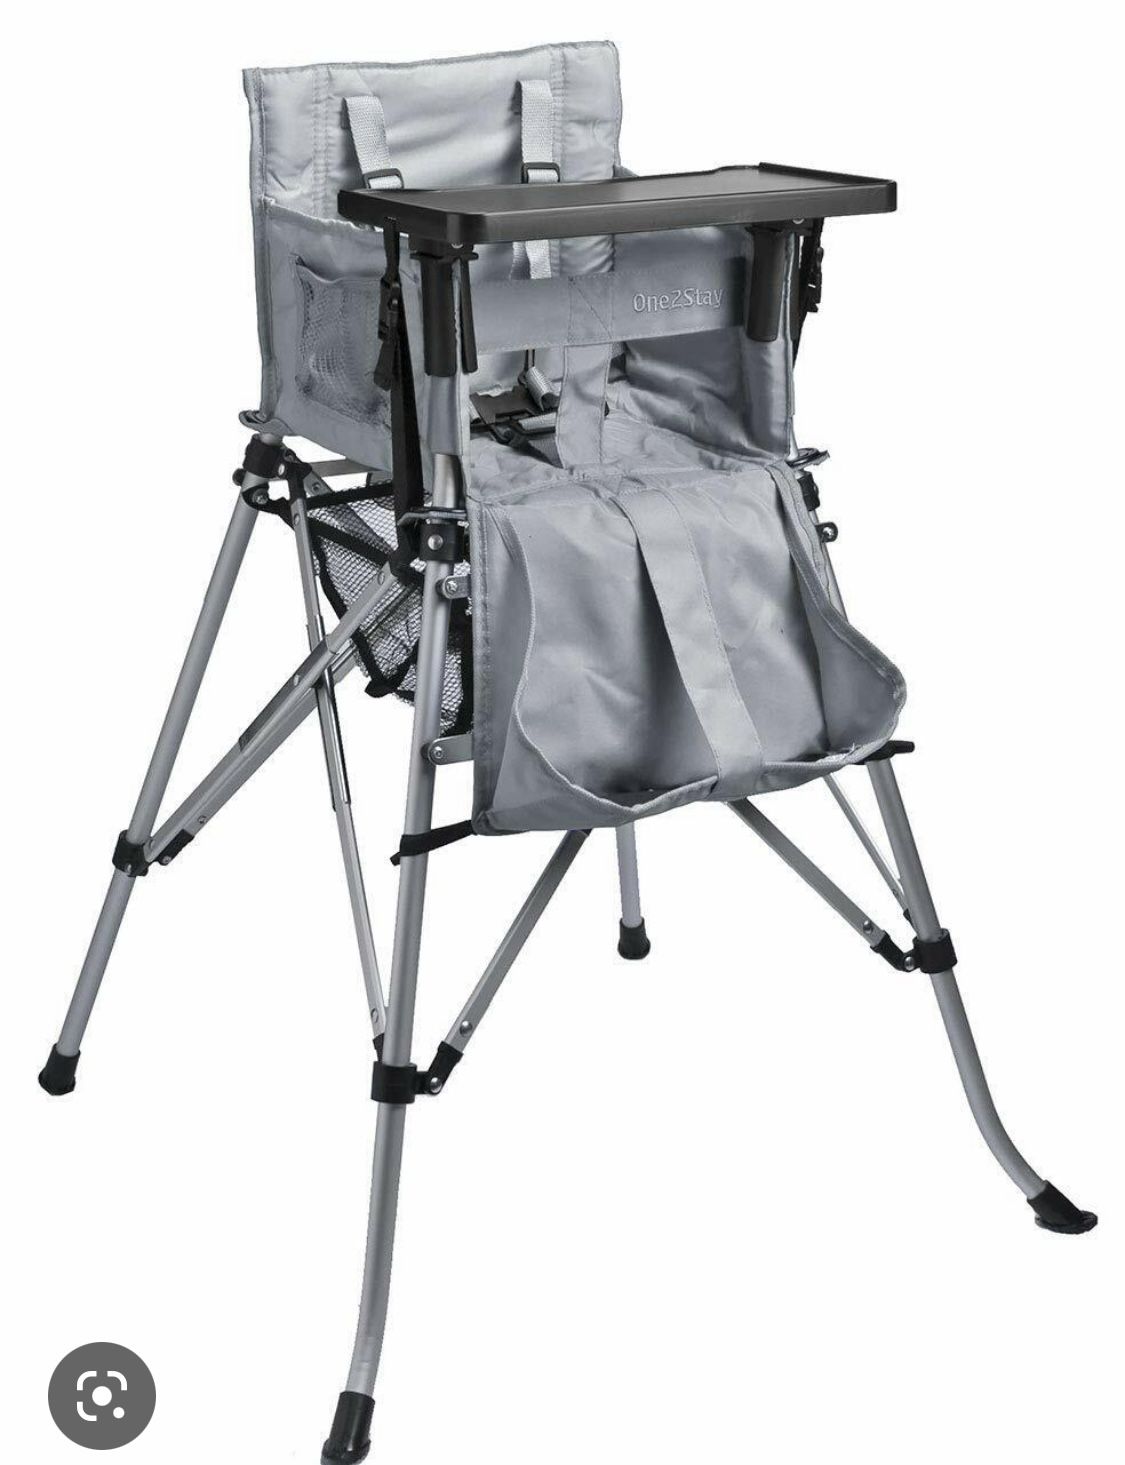 ONE2STAY PORTABLE HIGH CHAIR CAMPING BABY HIGH CHAIR